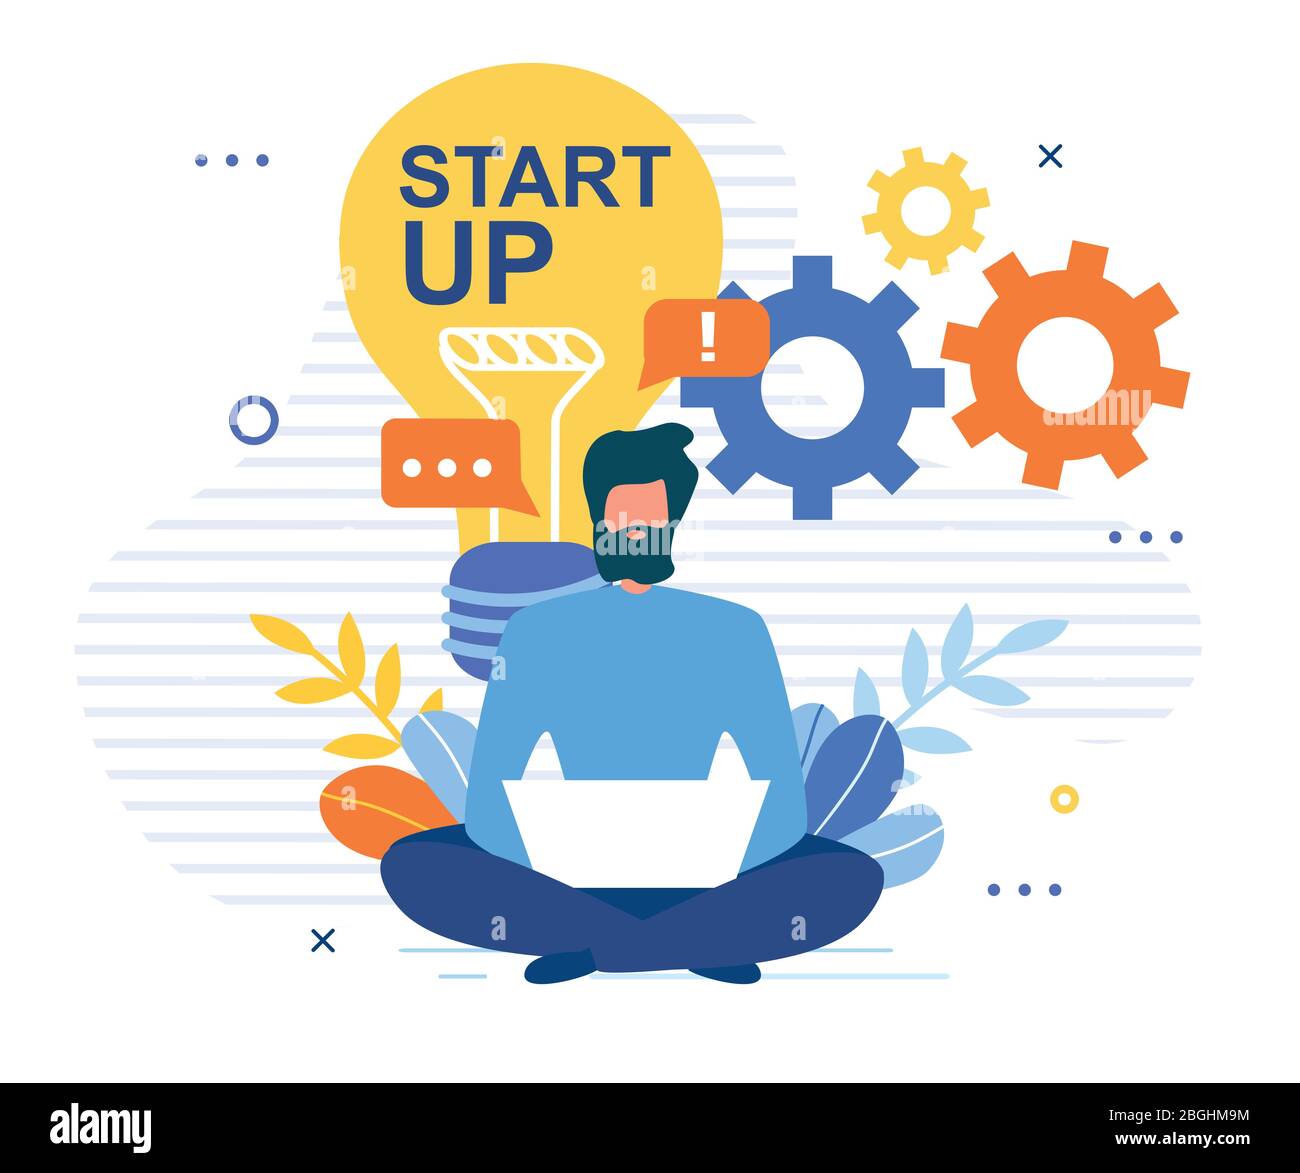 Business Startup Social Media Network Technology Development. Cartoon Man Character Working on Laptop, Communicating Online, Researching on Internet. Stock Vector